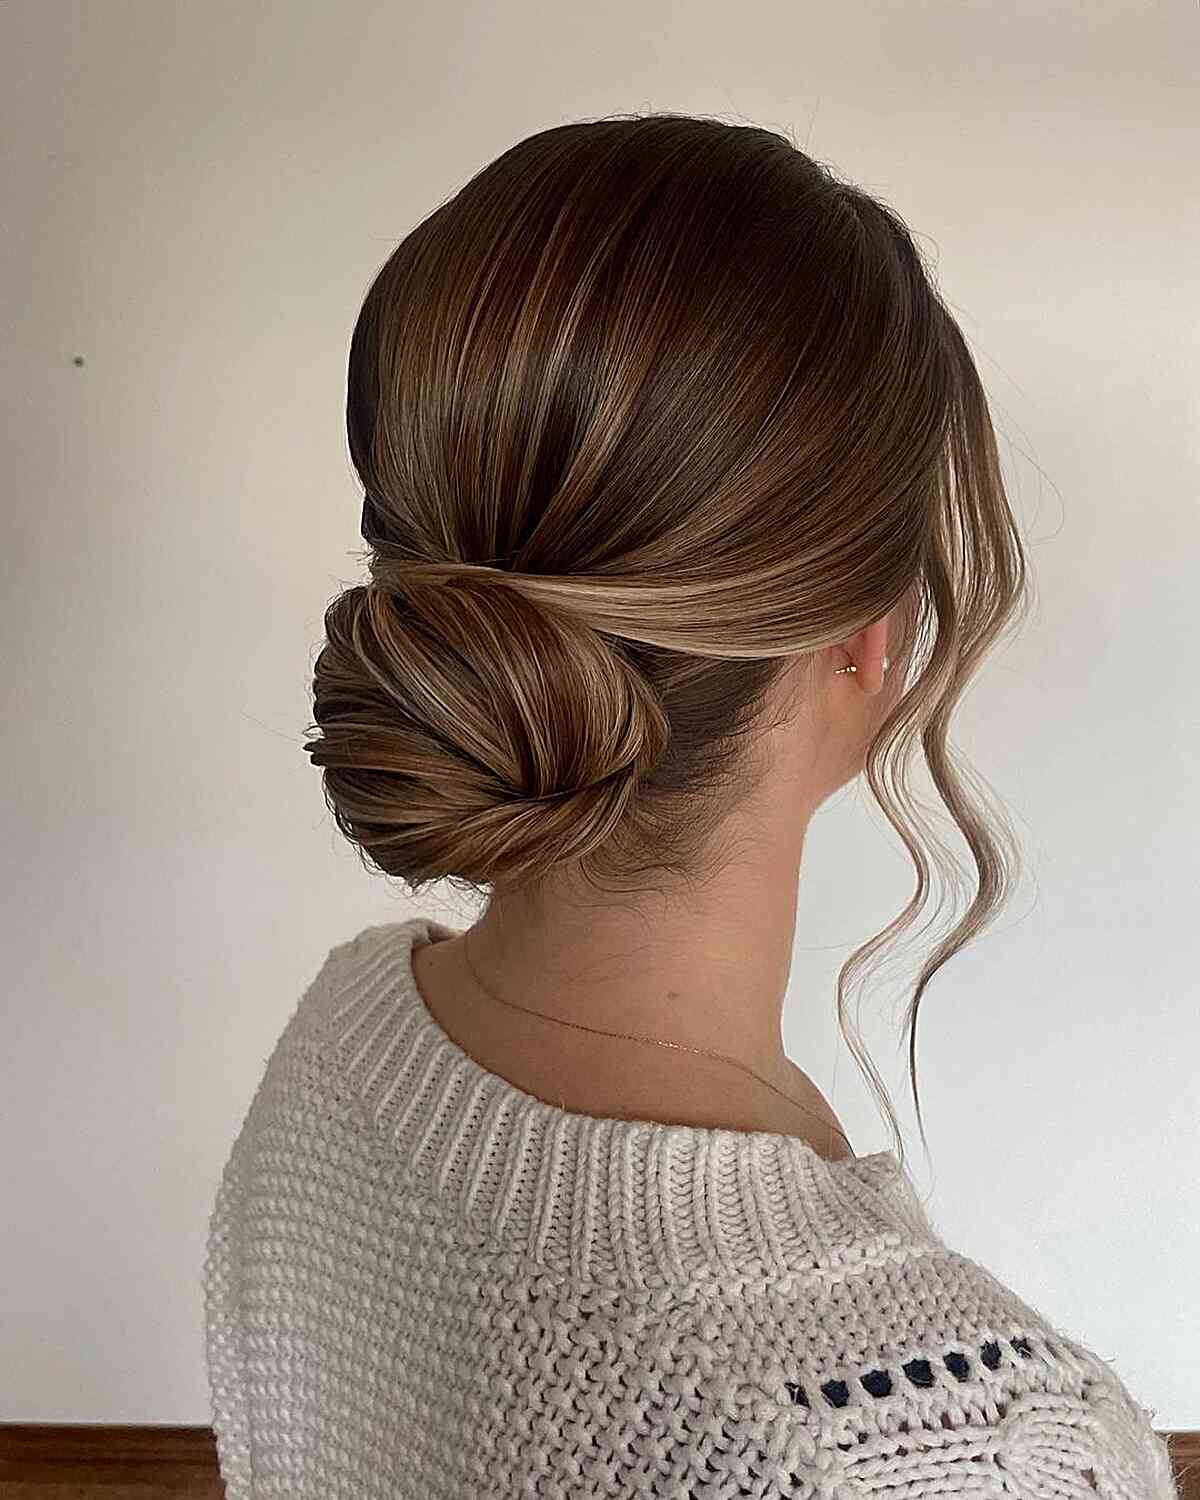 Neat Prom Bun with Framing Pieces